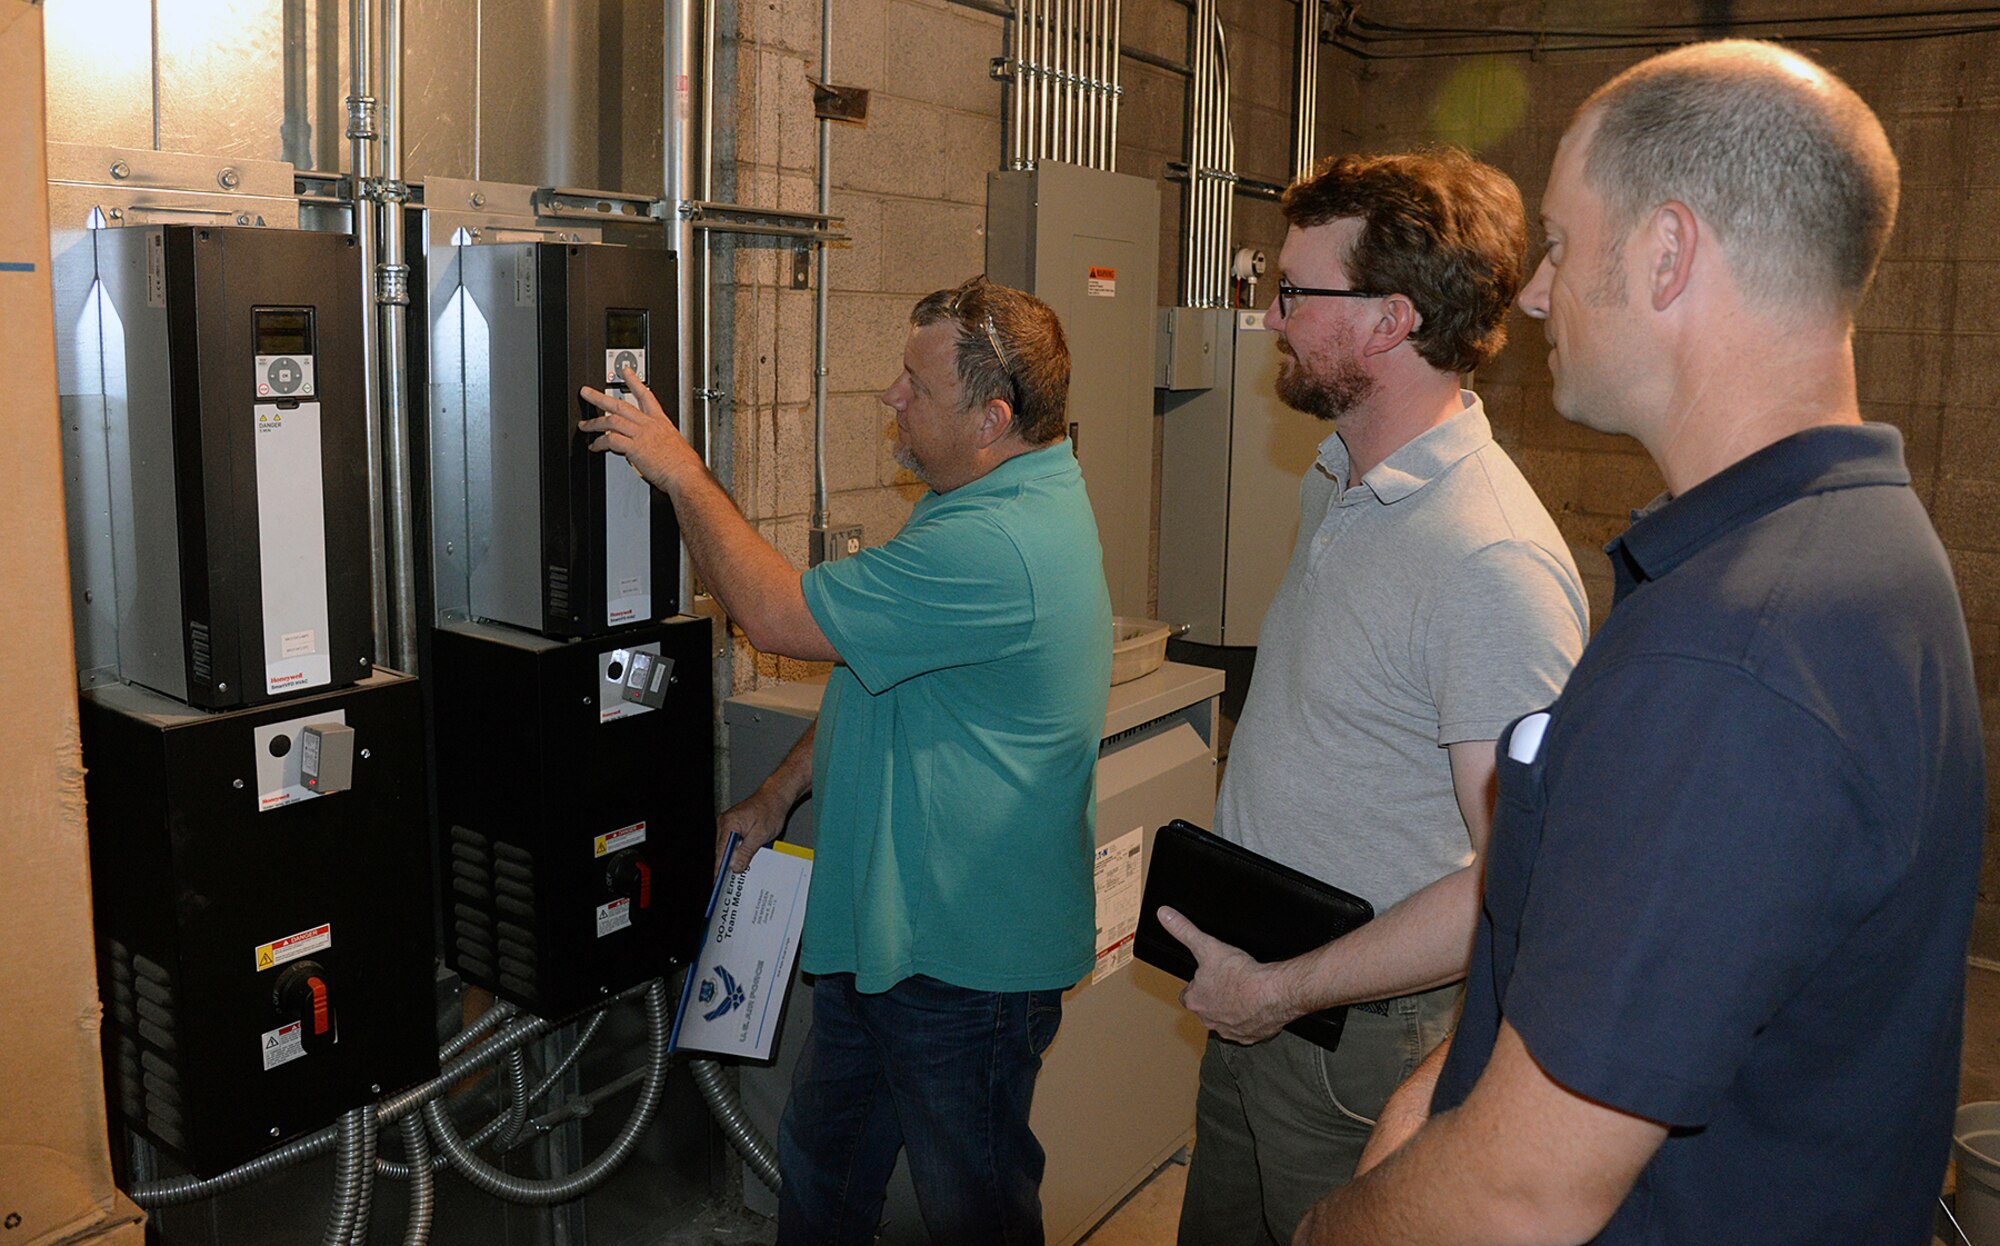 Shane Jepson, facility manager for building 220, shows ISO 50001 auditors Jonathan Clark and Rob Ellis, newly installed variable frequency drive monitors located on the wall of a utility room.